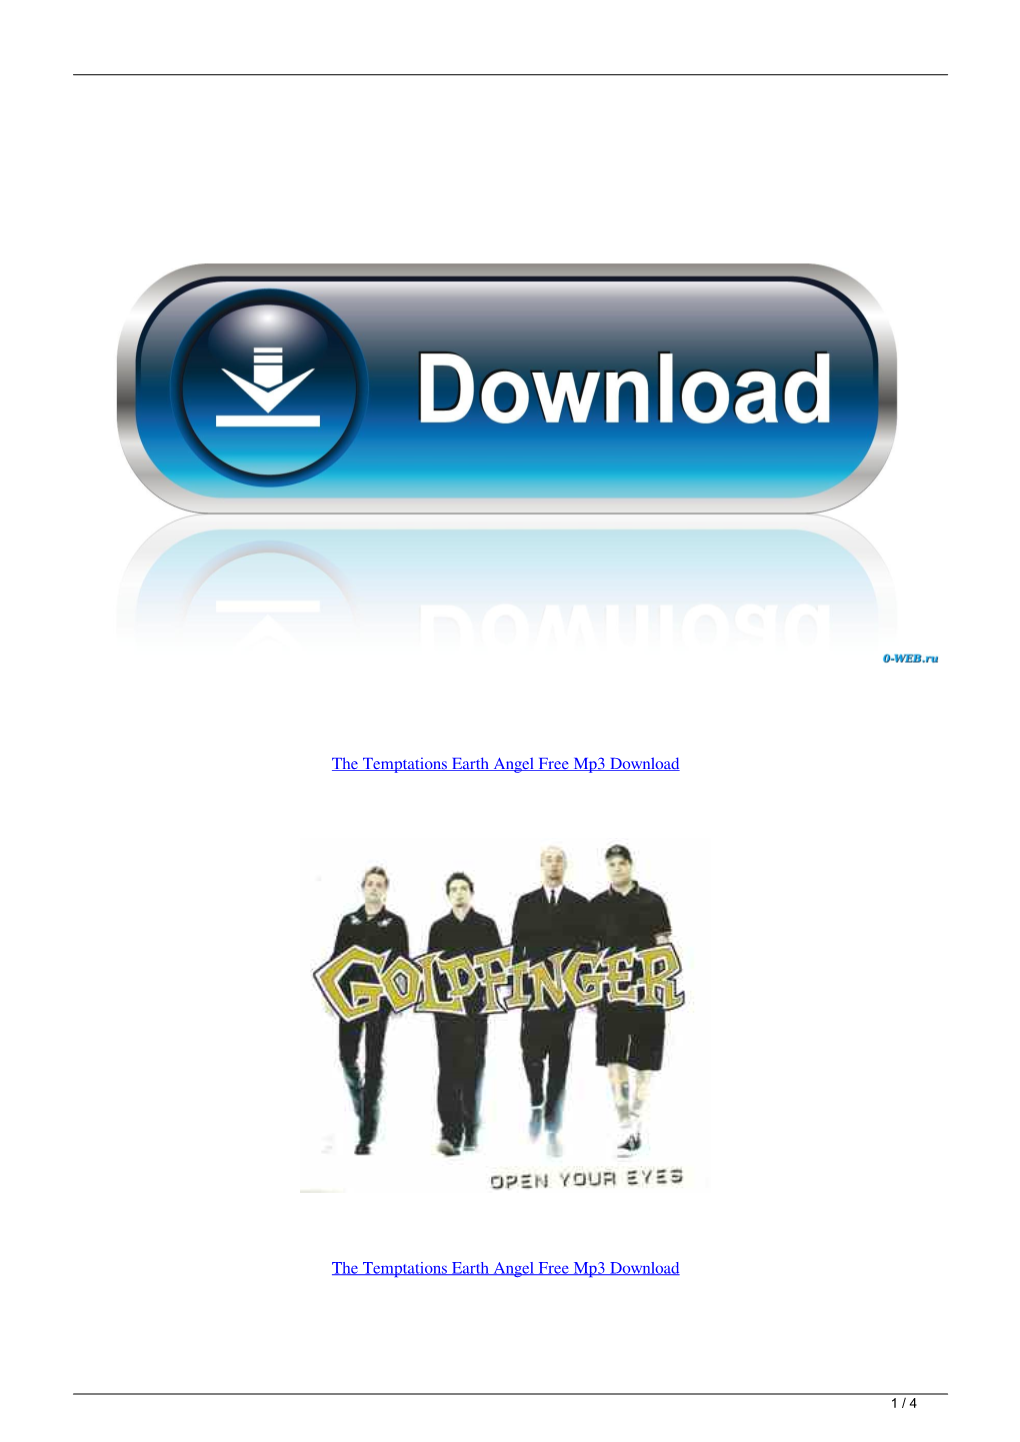 The Temptations Earth Angel Free Mp3 Download